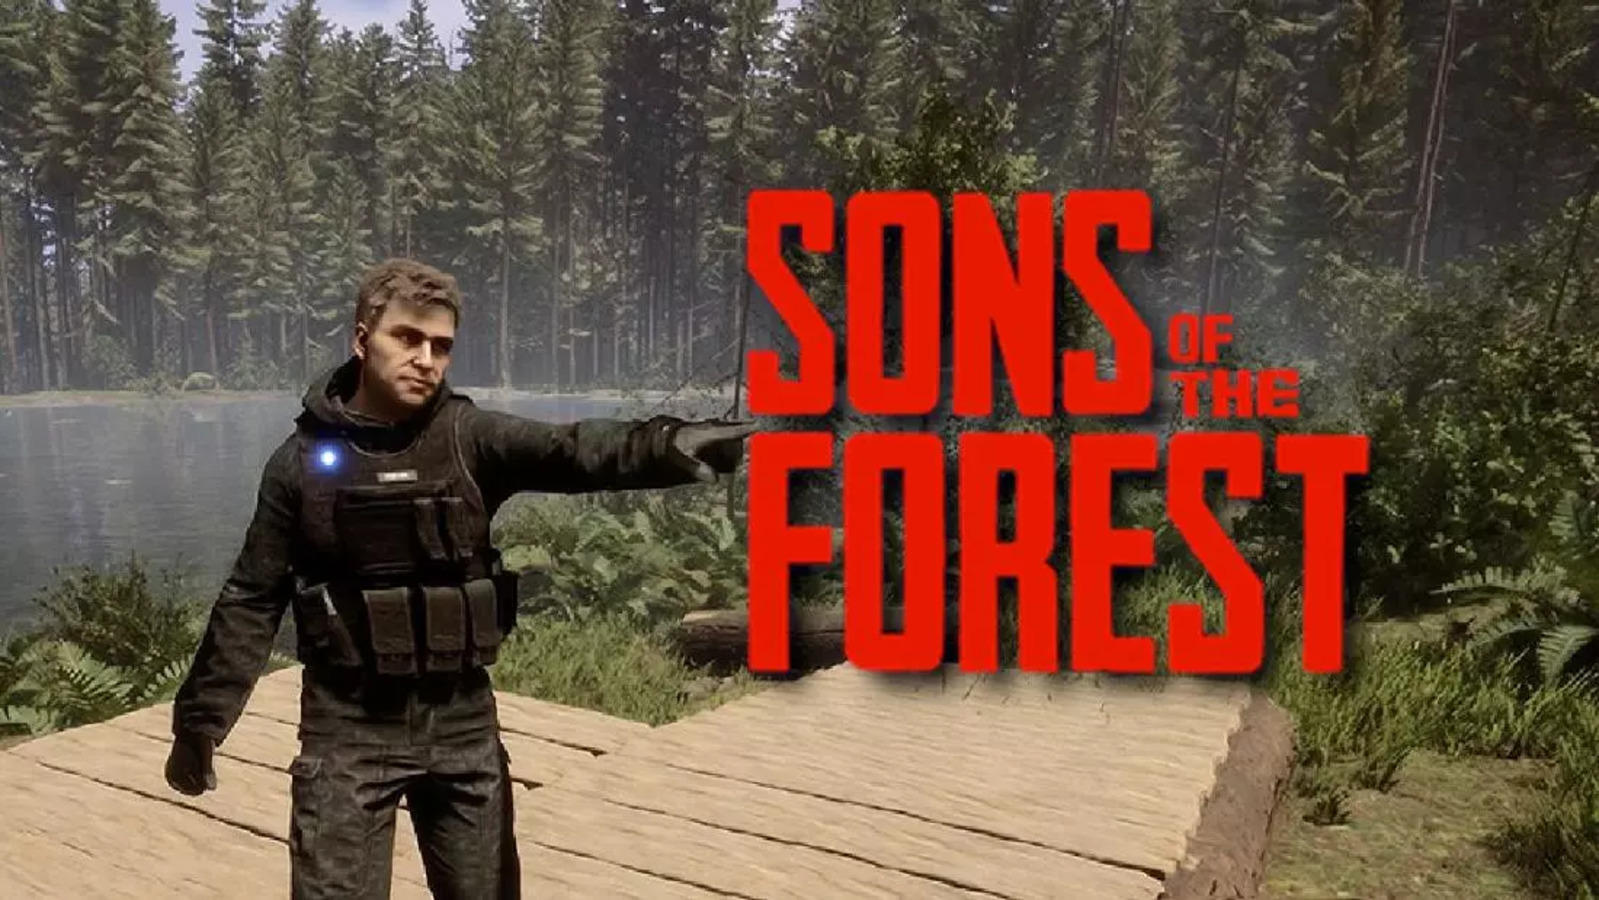 2nd Q&A with Endnight Games - Sons of The Forest 